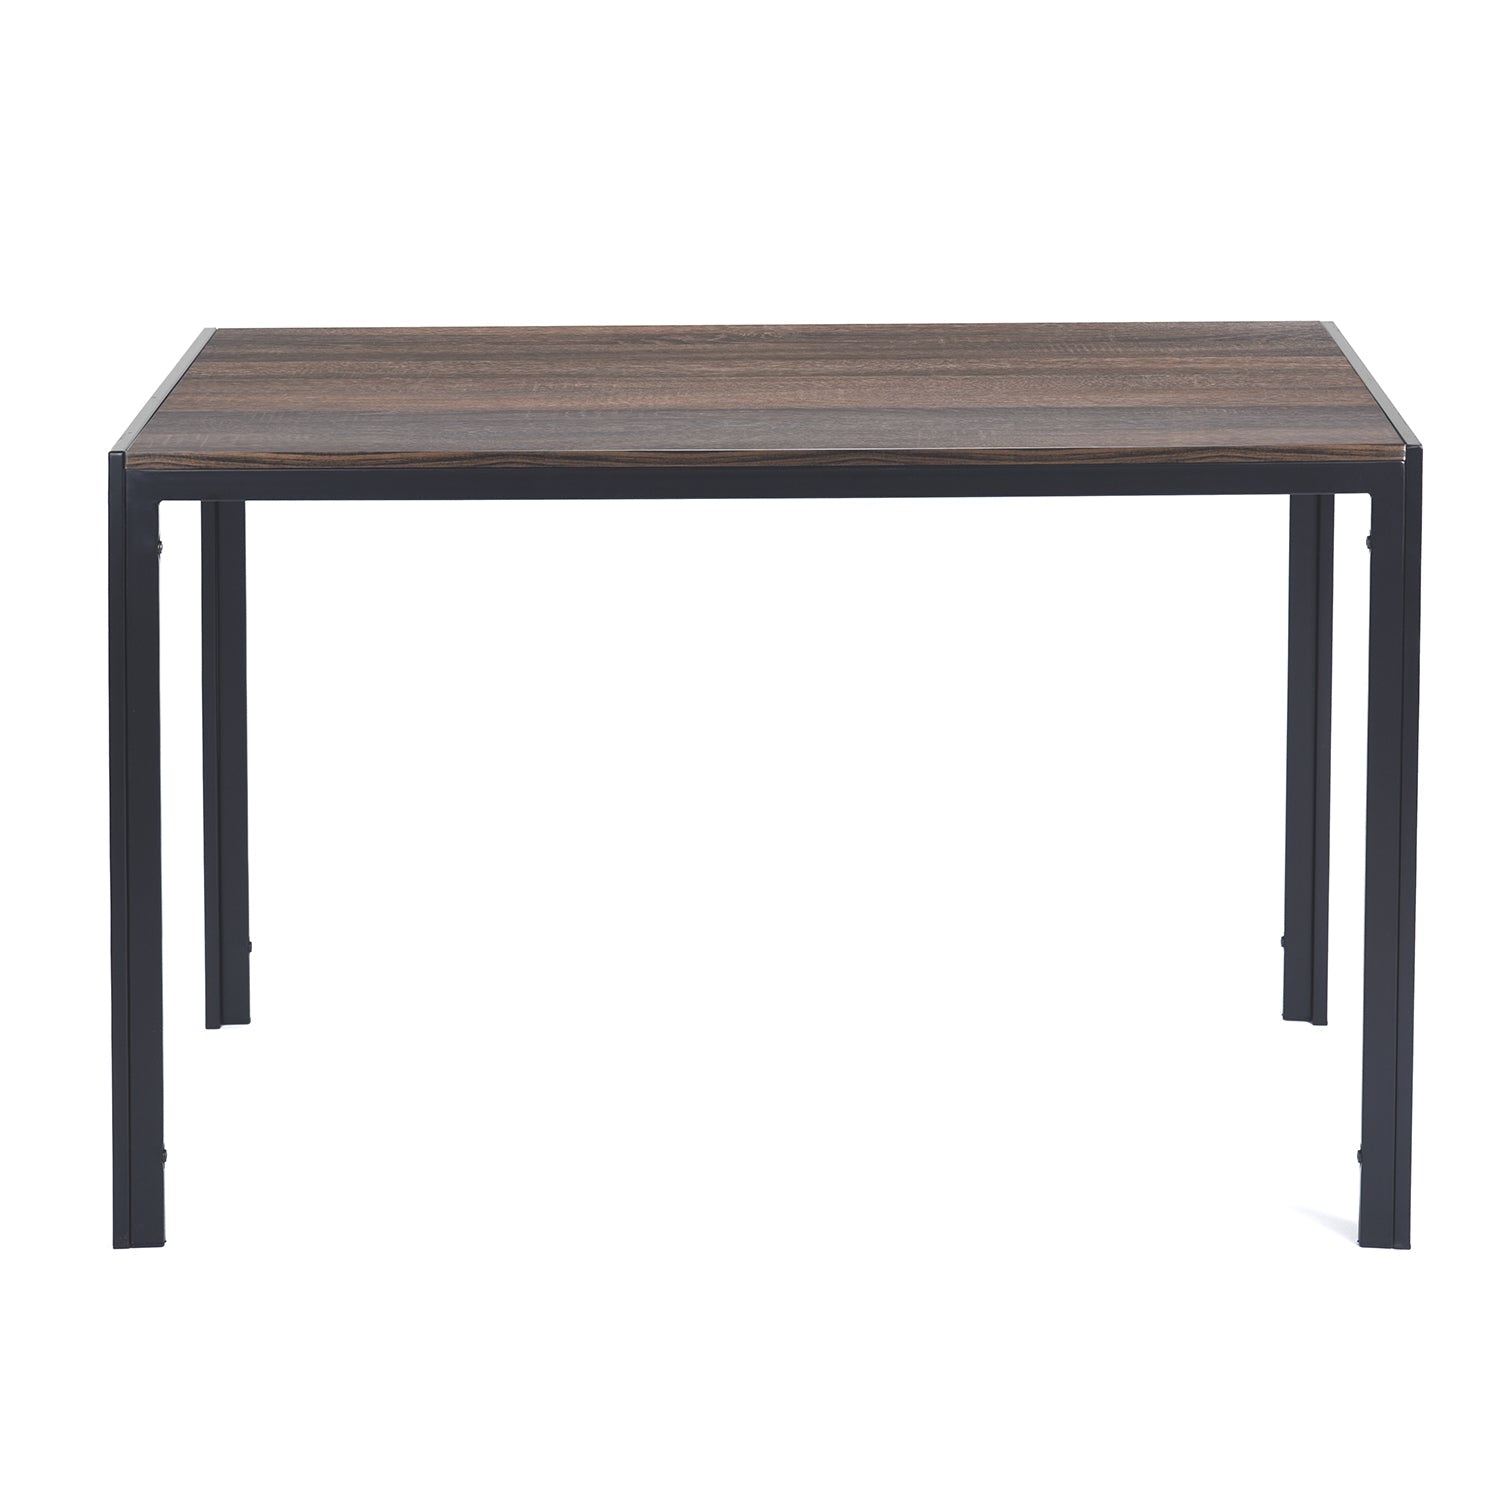 Vargas Dining Table